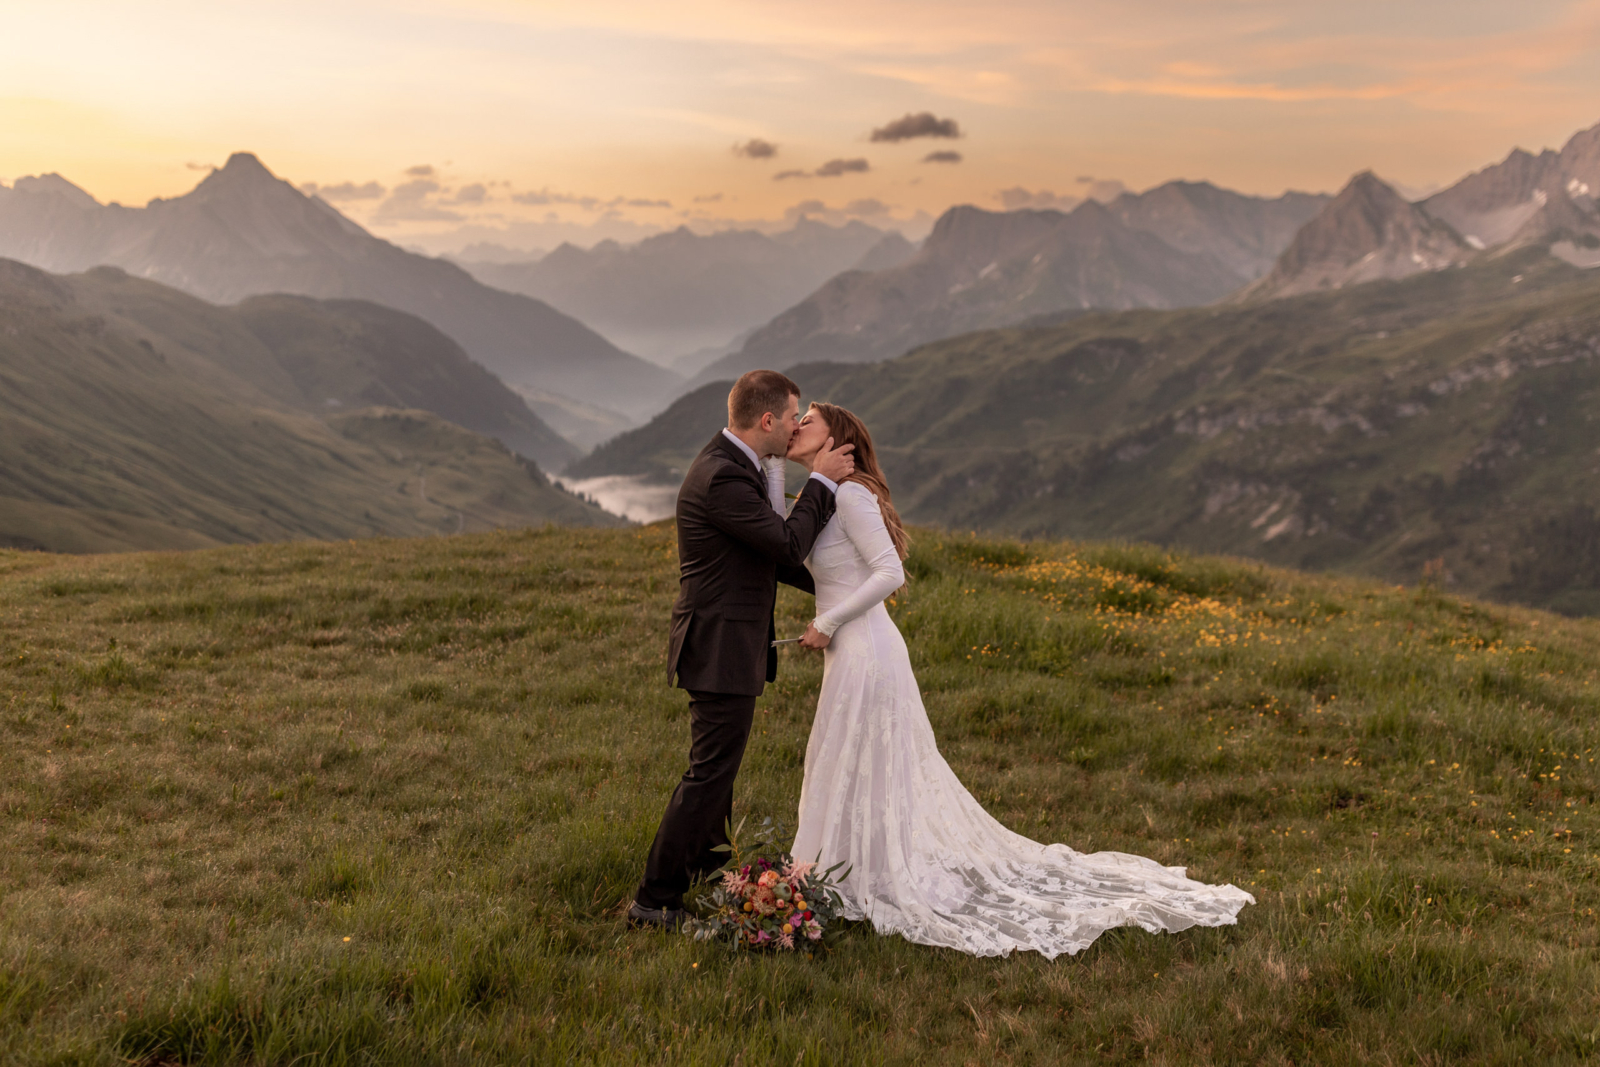 First Kiss at the Summer Solstice Mountain Elopement in Austria